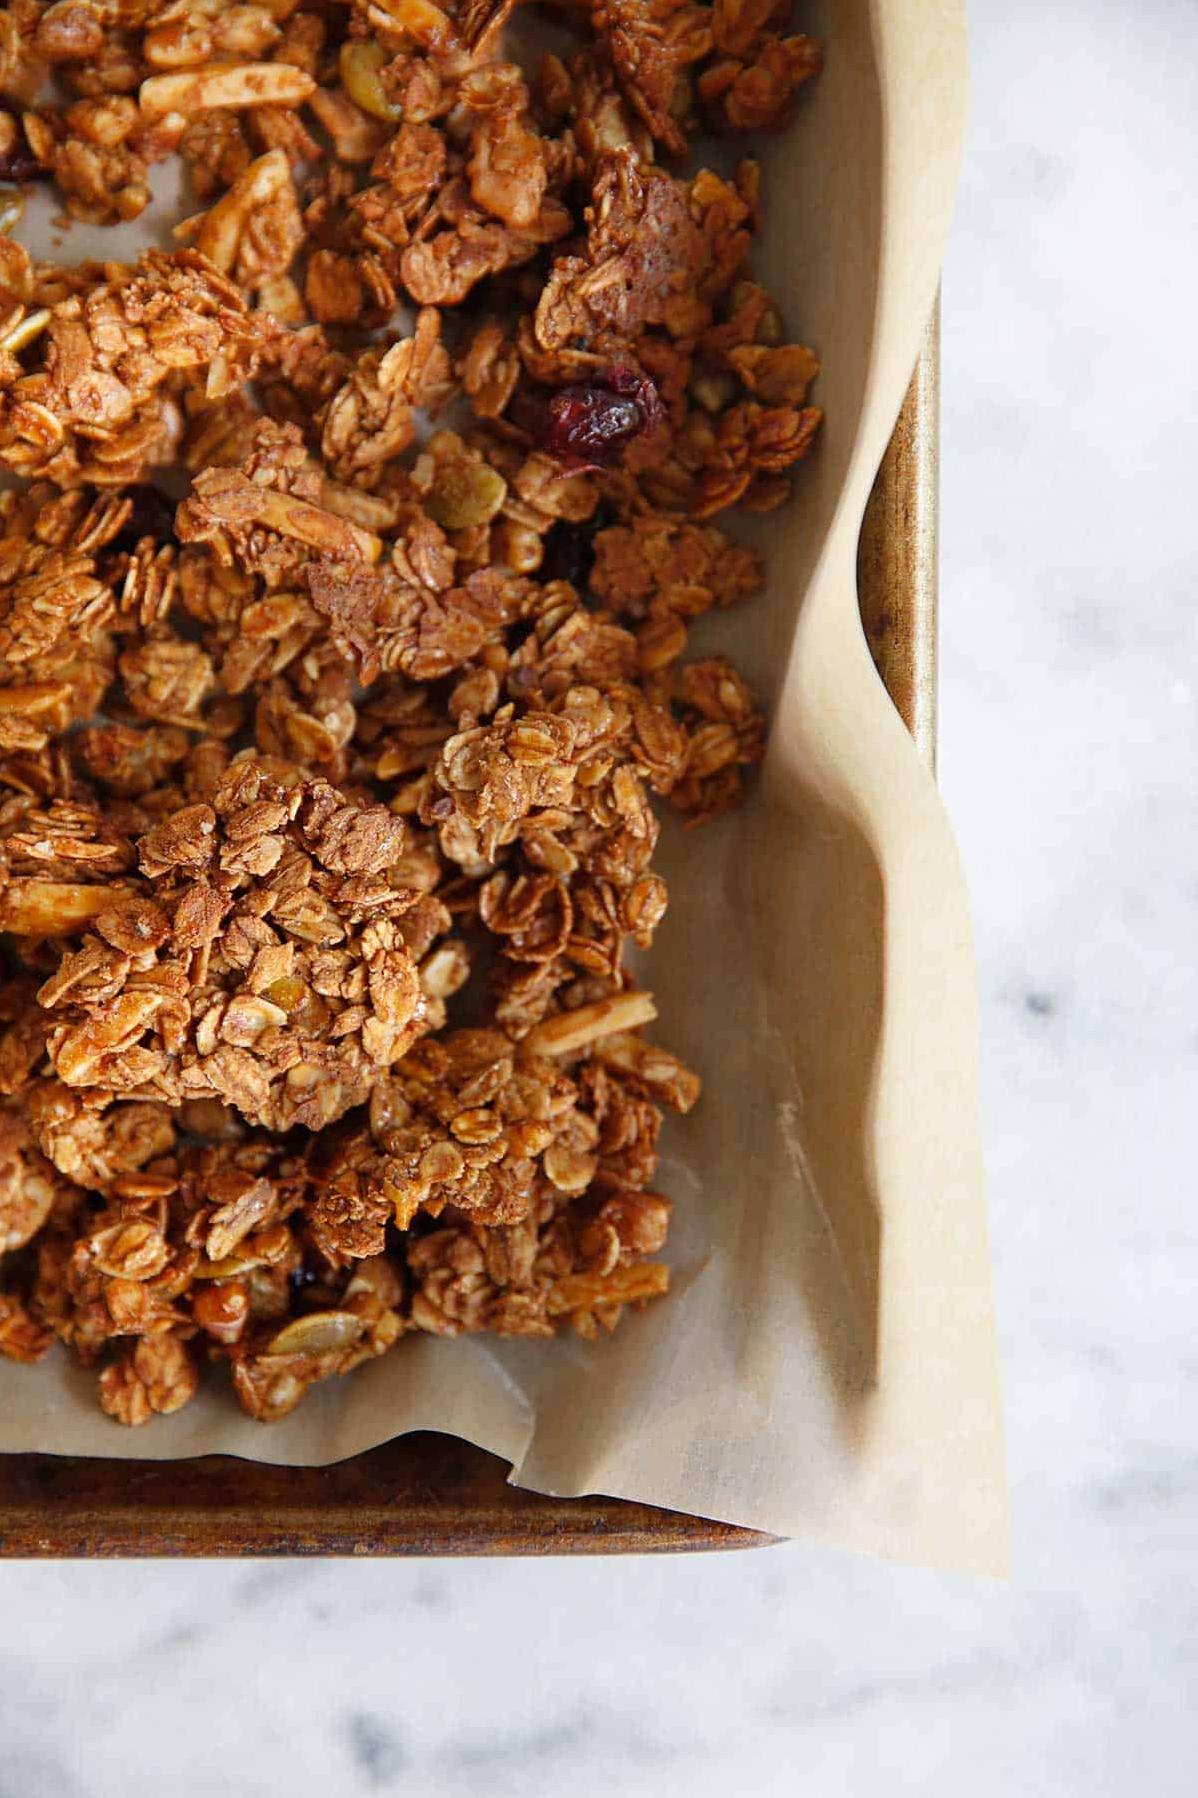  Crunchy, nutty, and perfectly sweetened granola